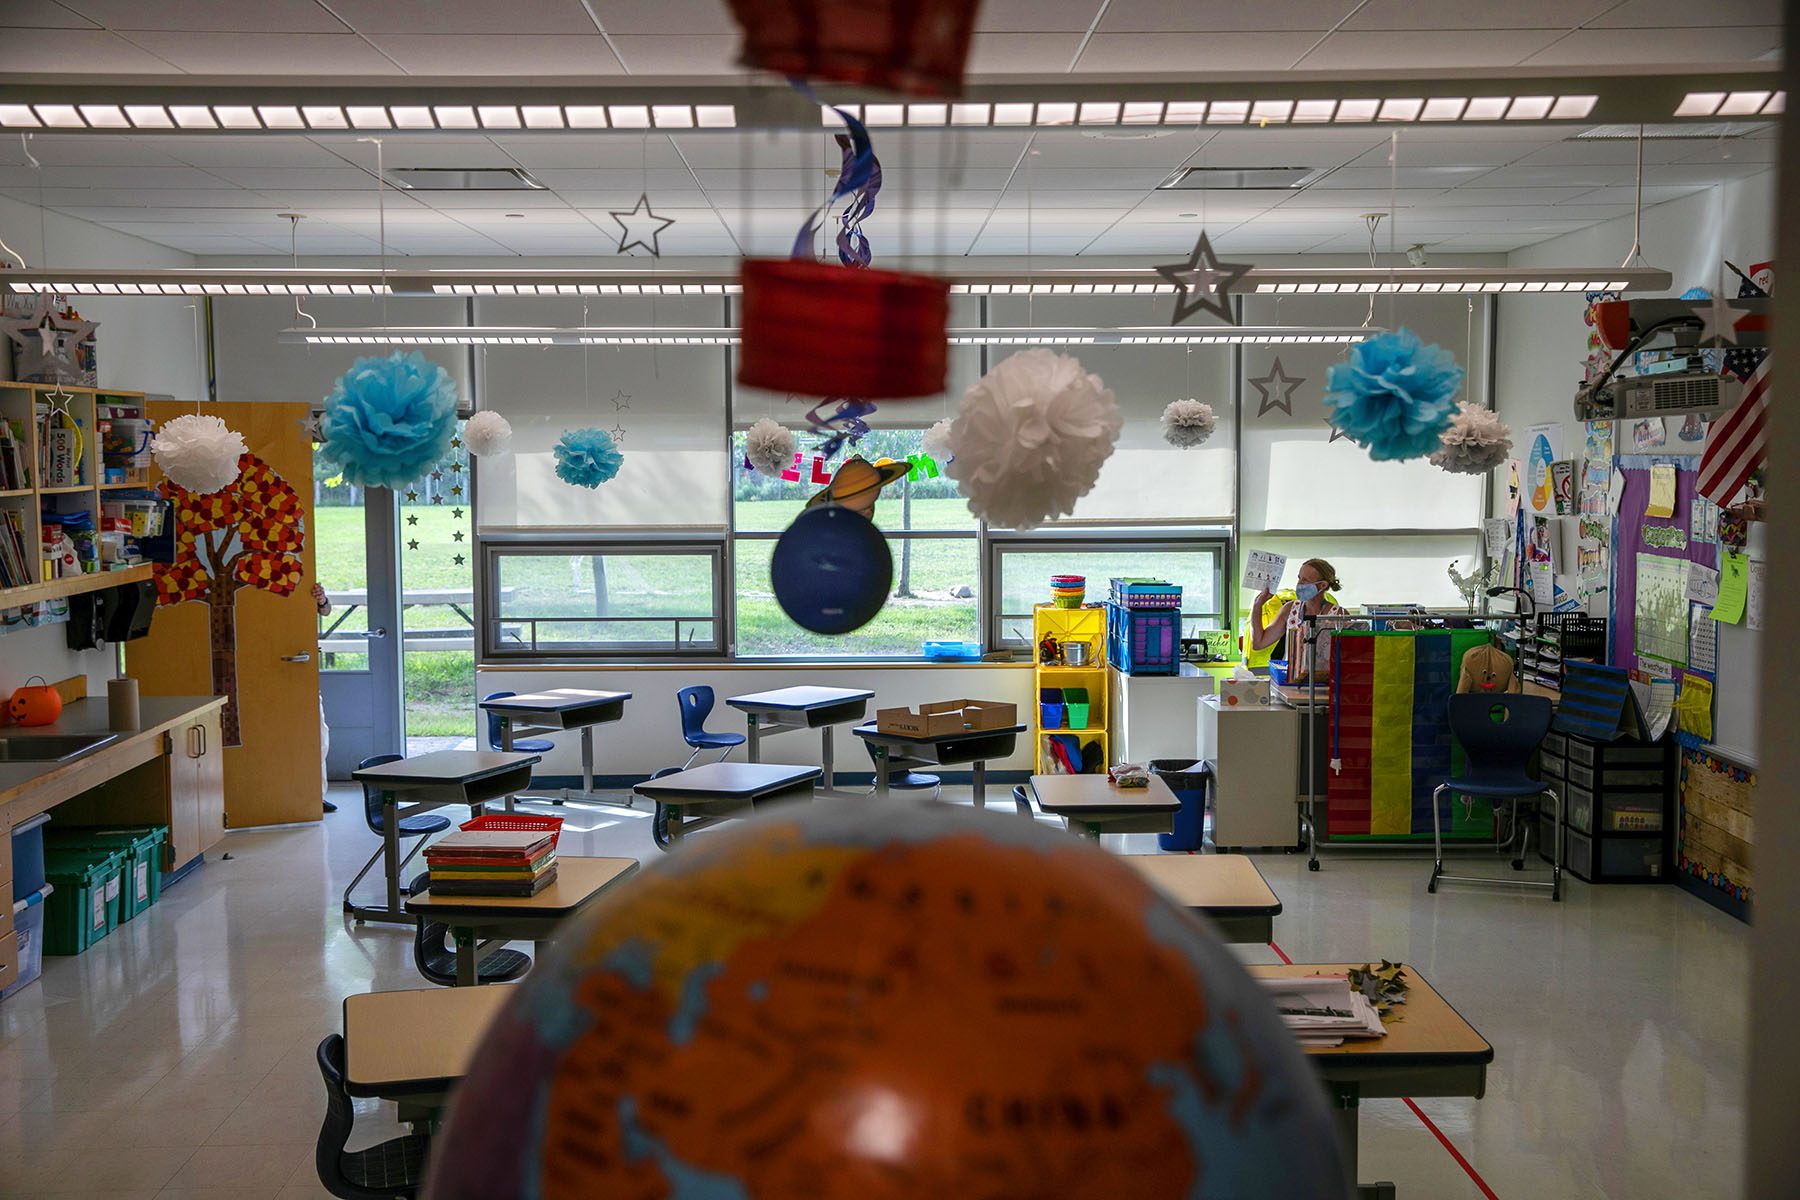 An empty classroom decorated with drawings of planets and trees is seen. A teacher is seen sitting at a desk and wearing a face mask.